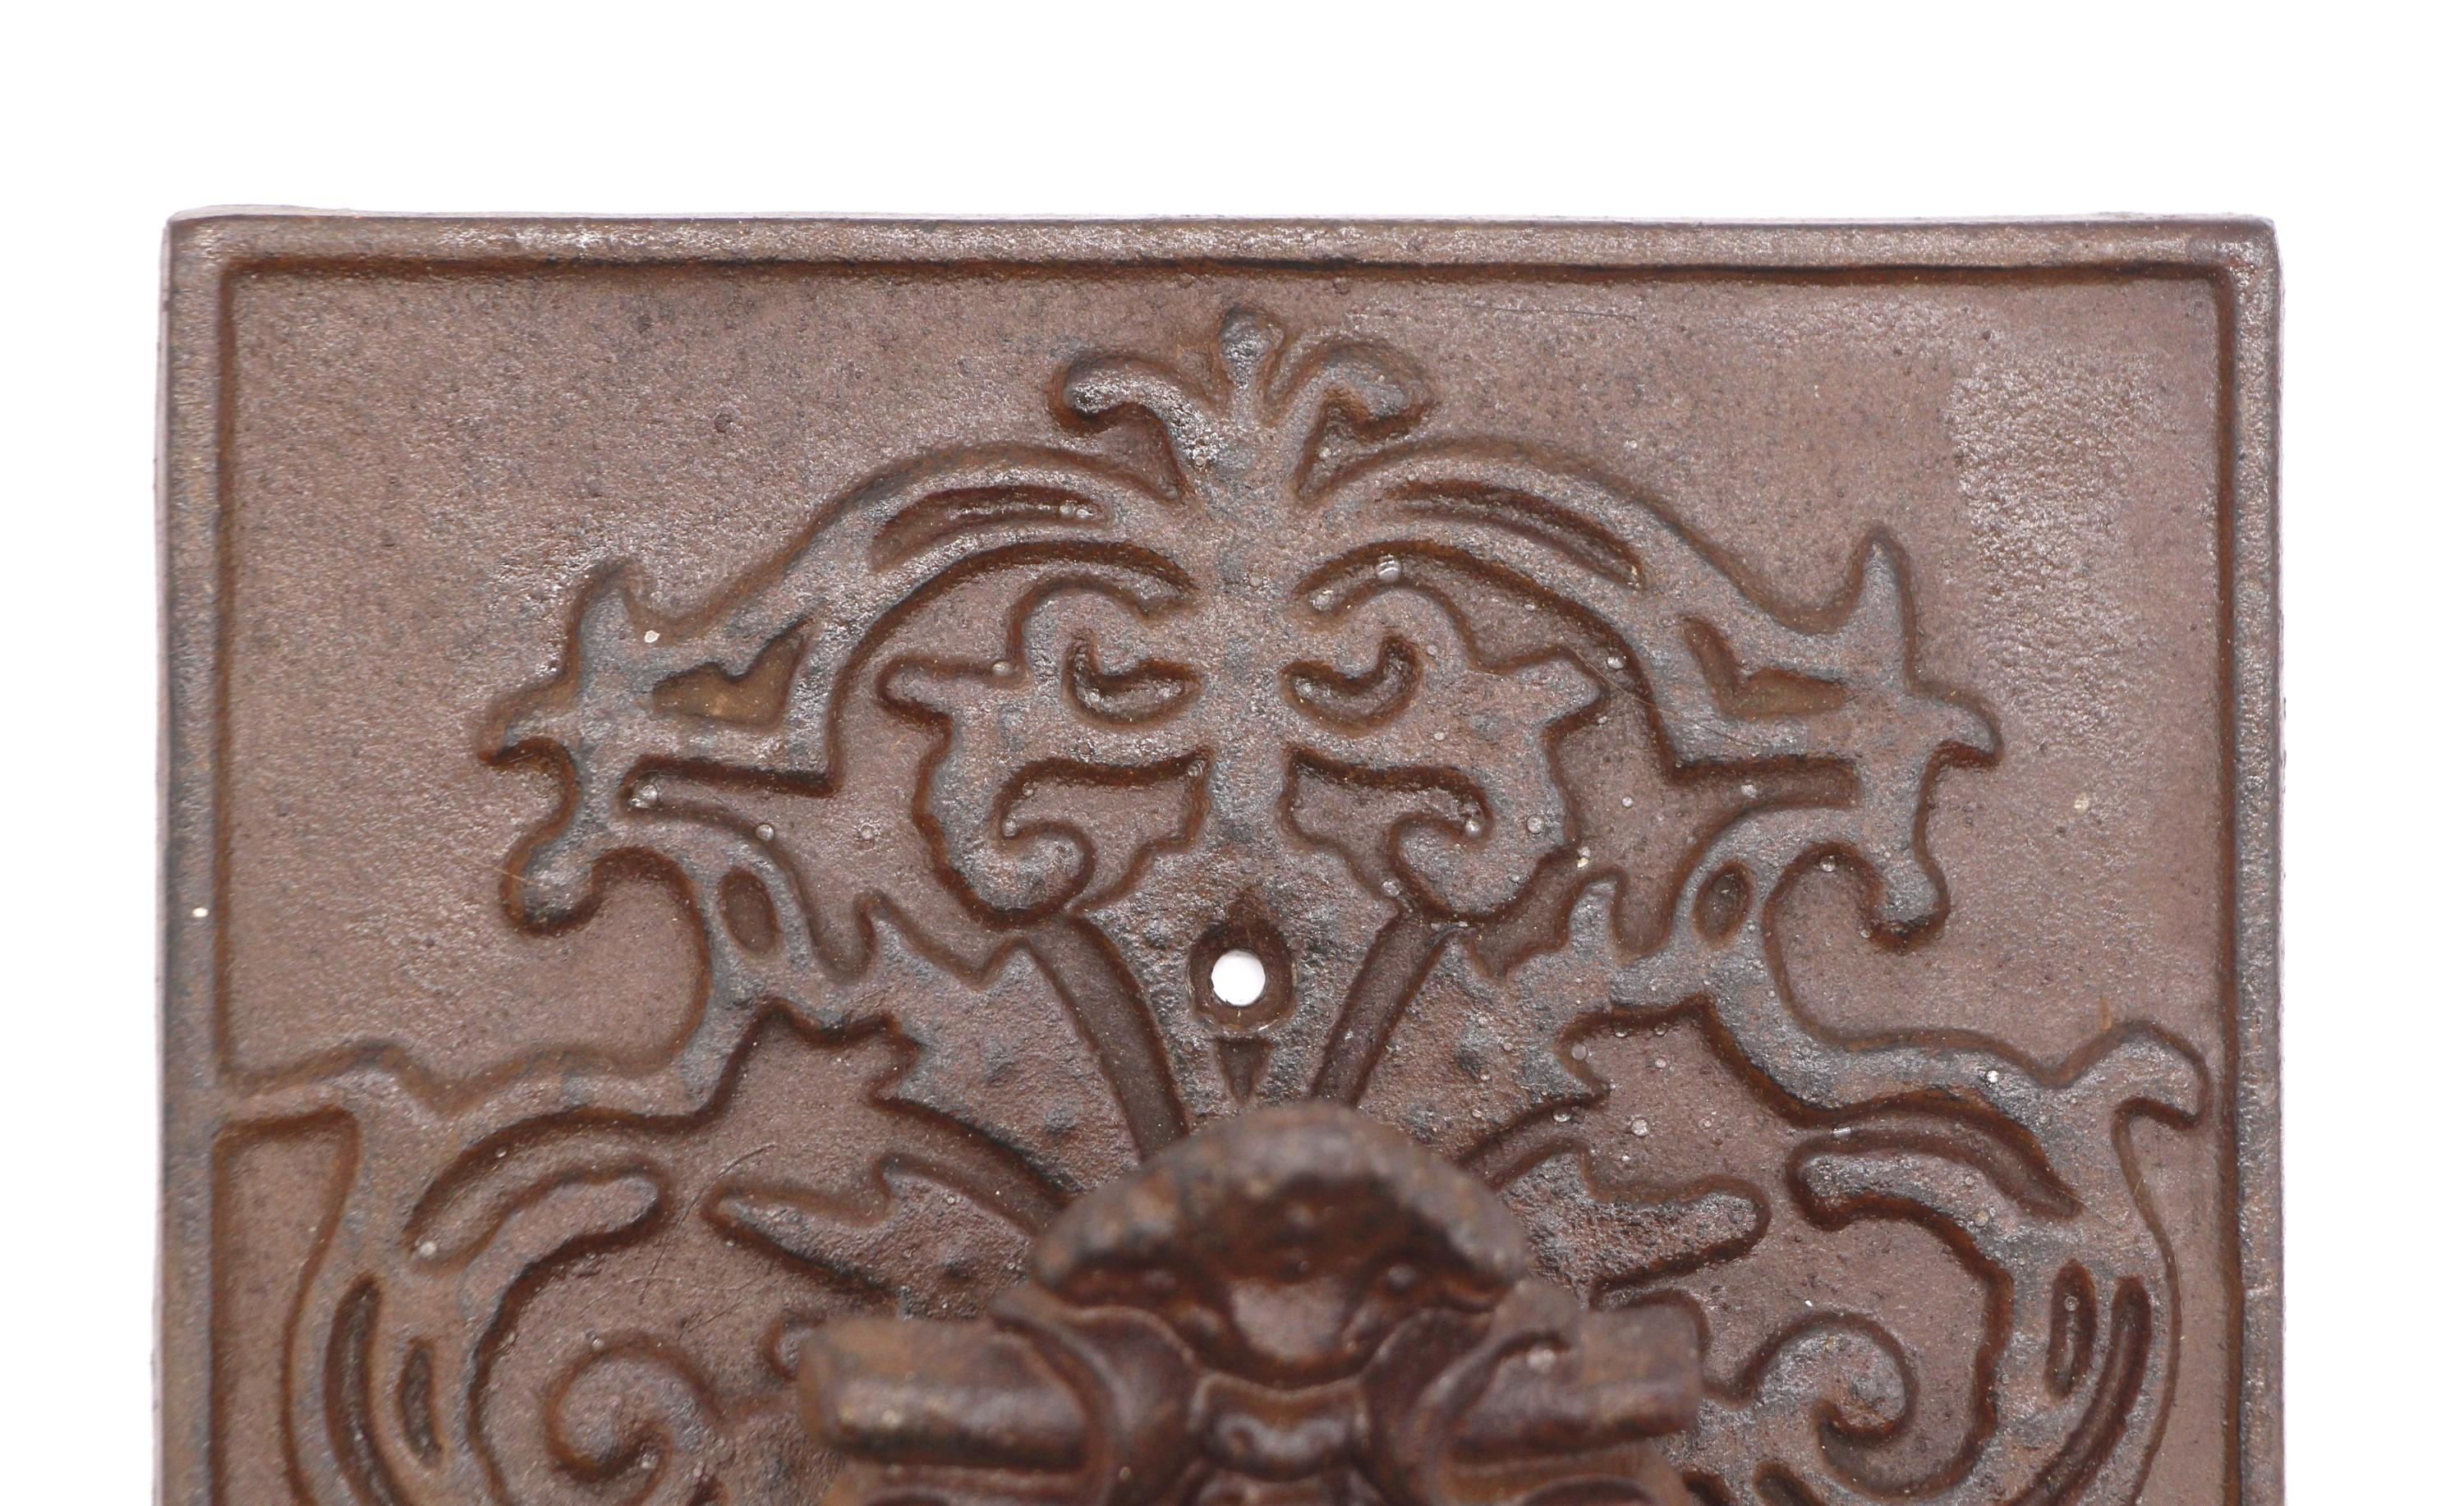 Early 20th century ornate rectangular cast iron door knocker. Center shows a figural griffin. This can be seen at our 400 Gilligan St location in Scranton, PA.